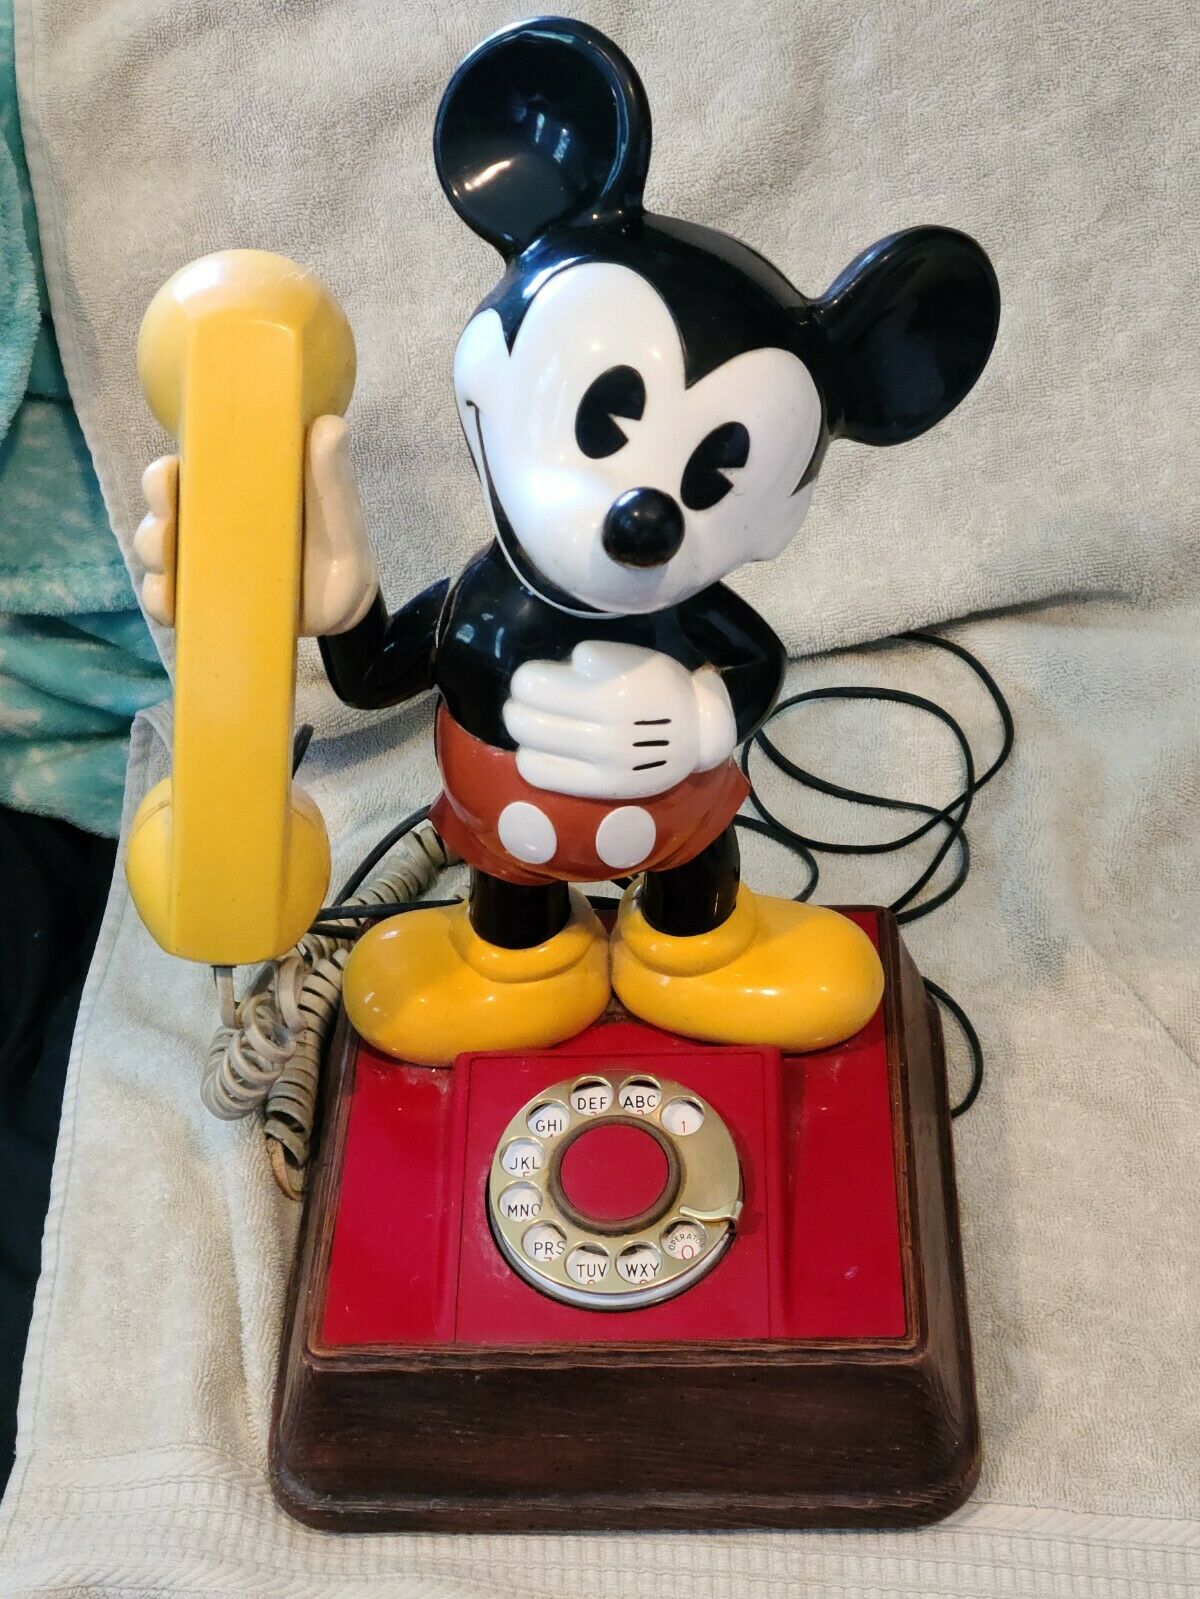 1976 Disney Productions  Mickey Mouse Phone Landline Rotary Dial Telephone